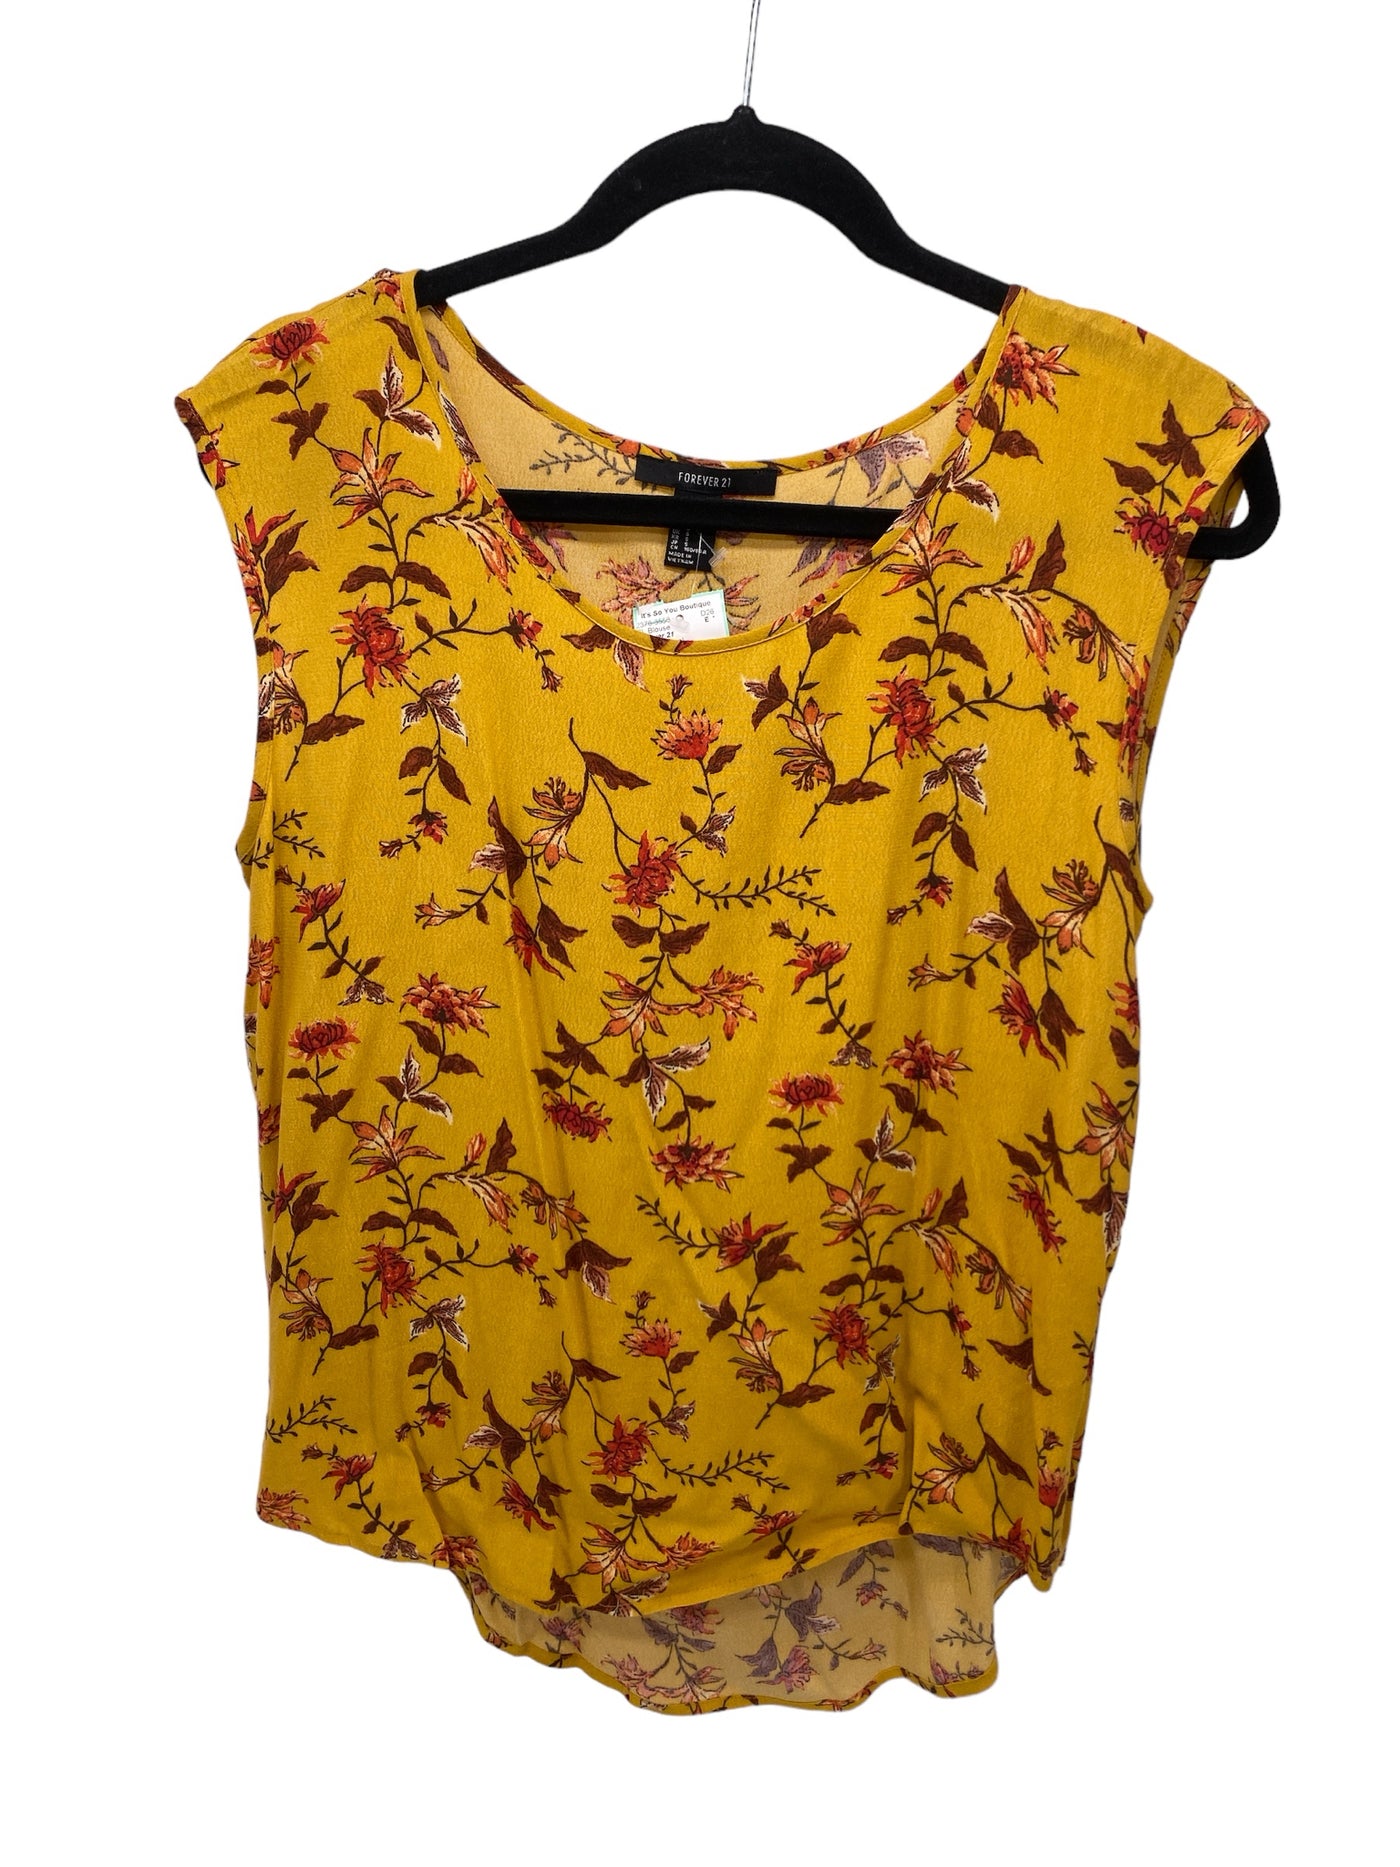 Forever 21 Misses Size Small Yellow Floral SL Blouse